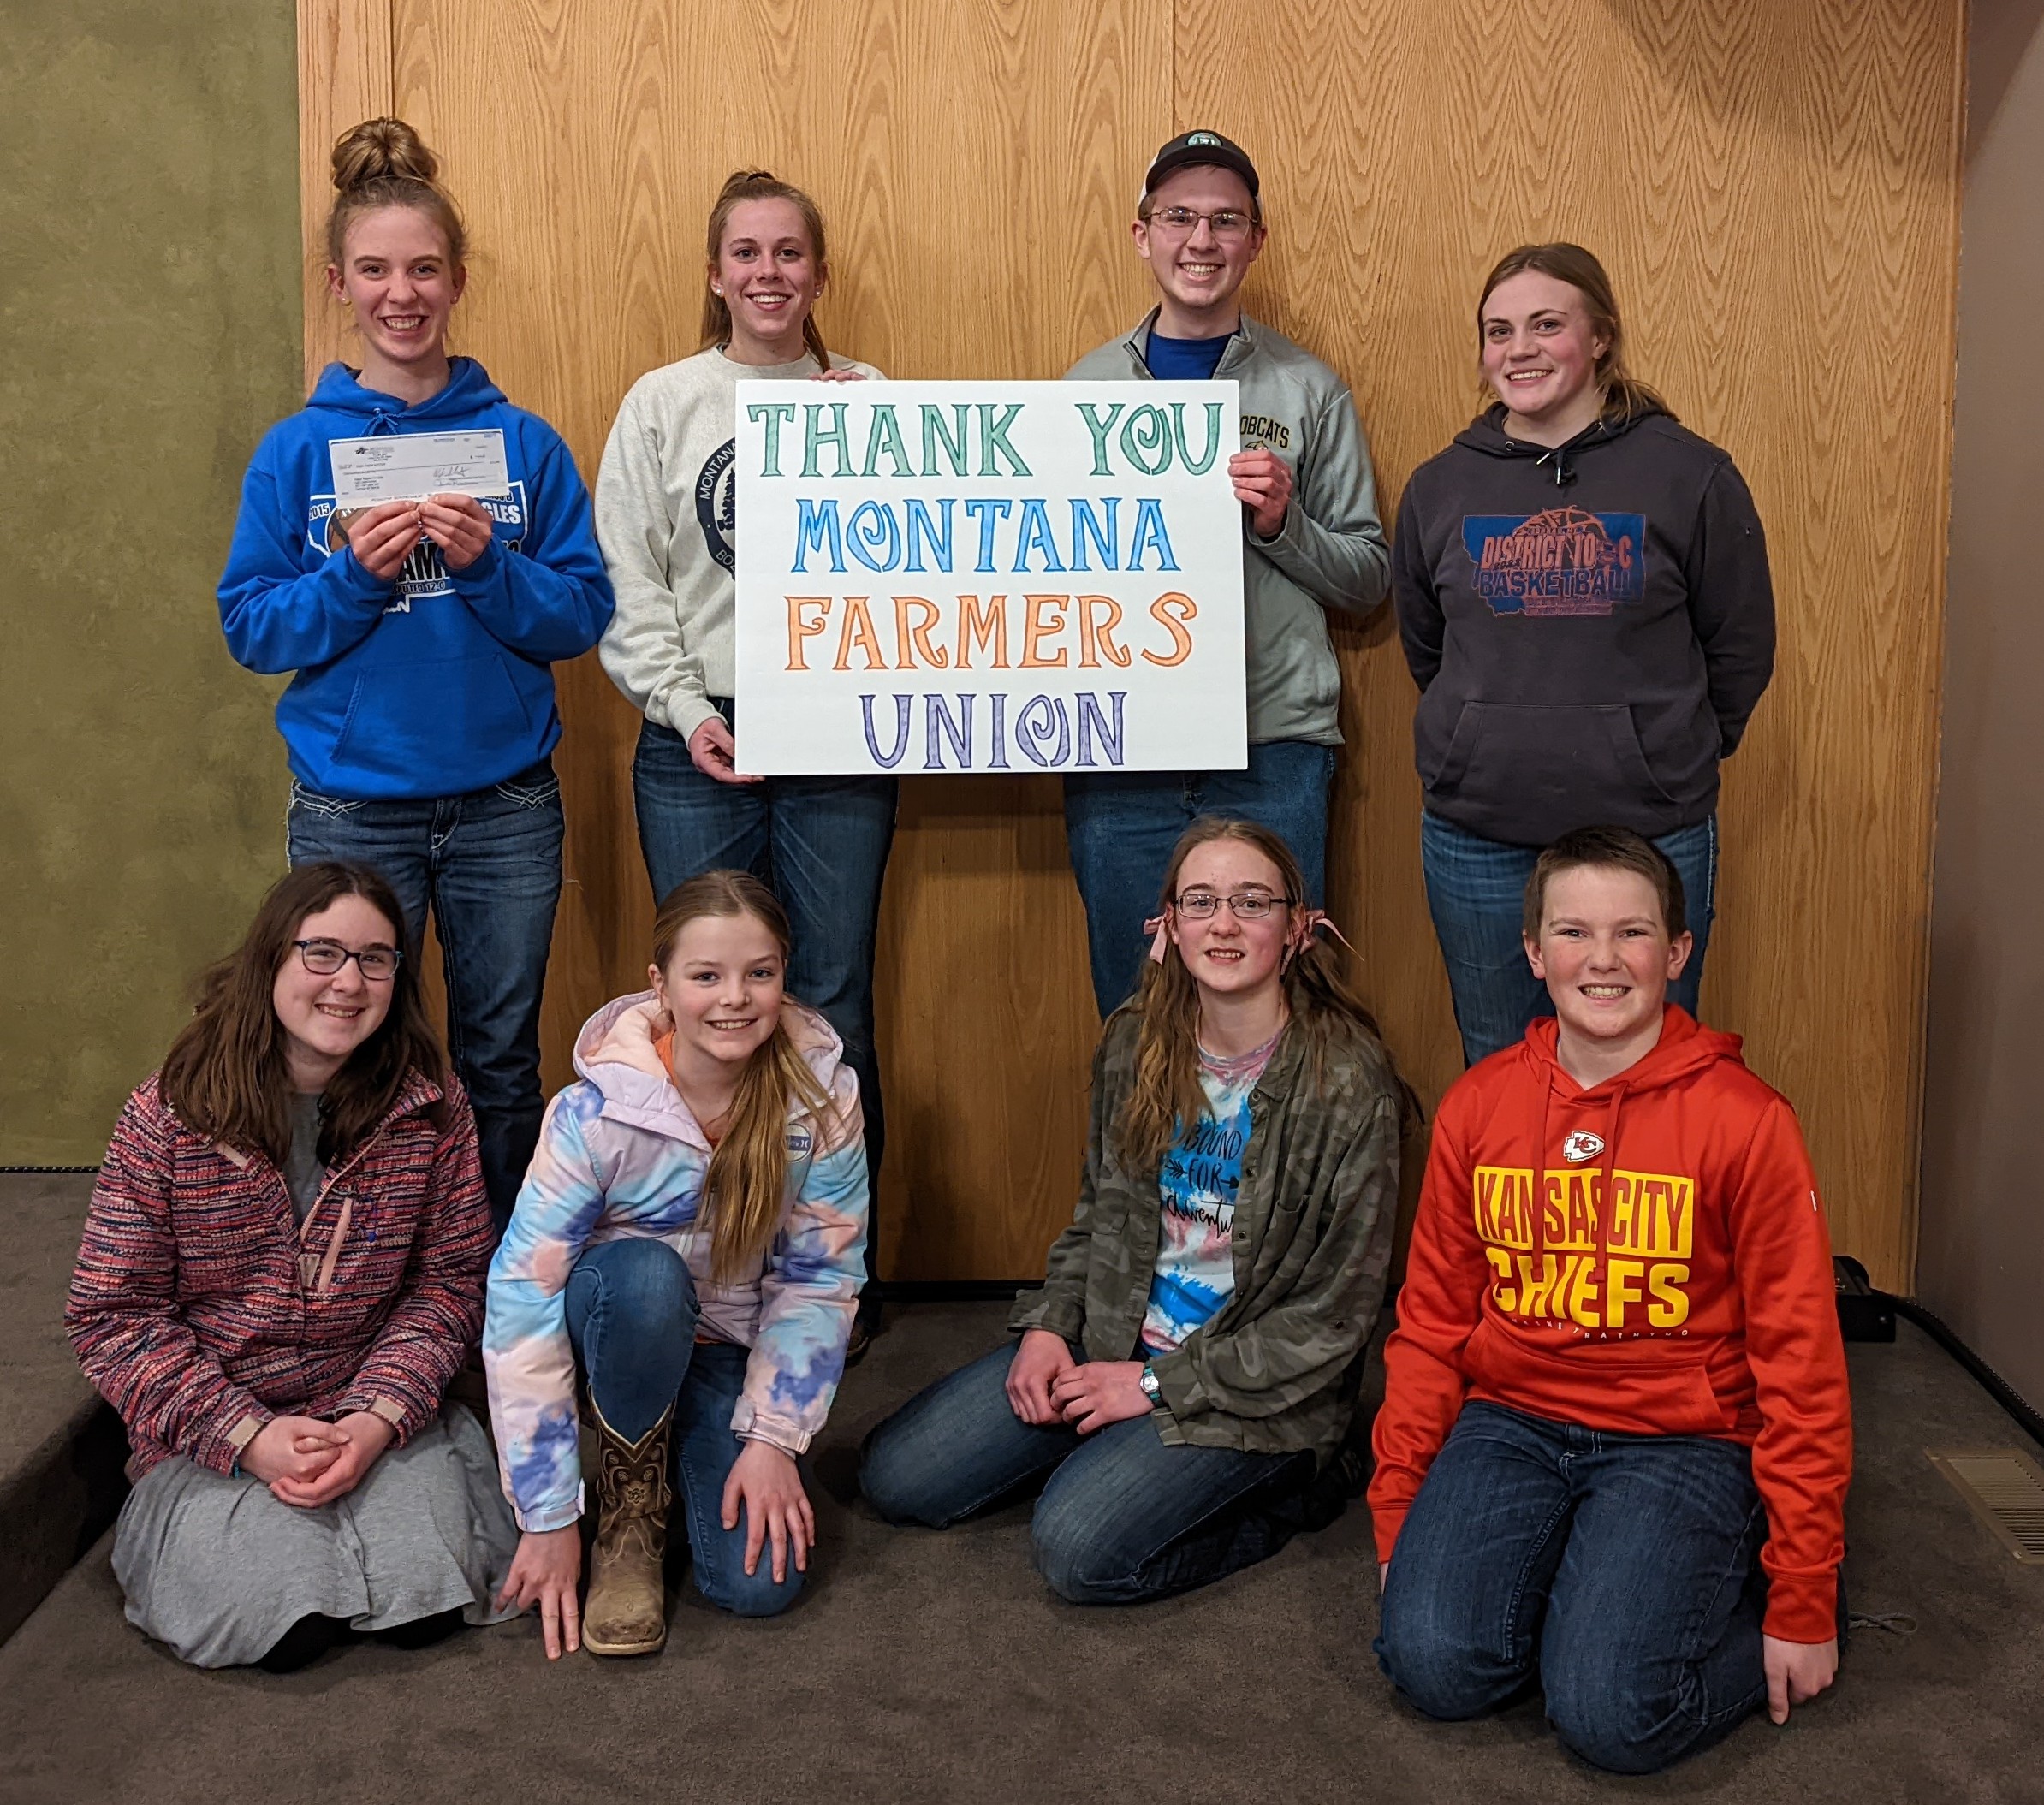 Eager Eagles 4H Club Receiving Grant from and thanking Montana Farmers Union.